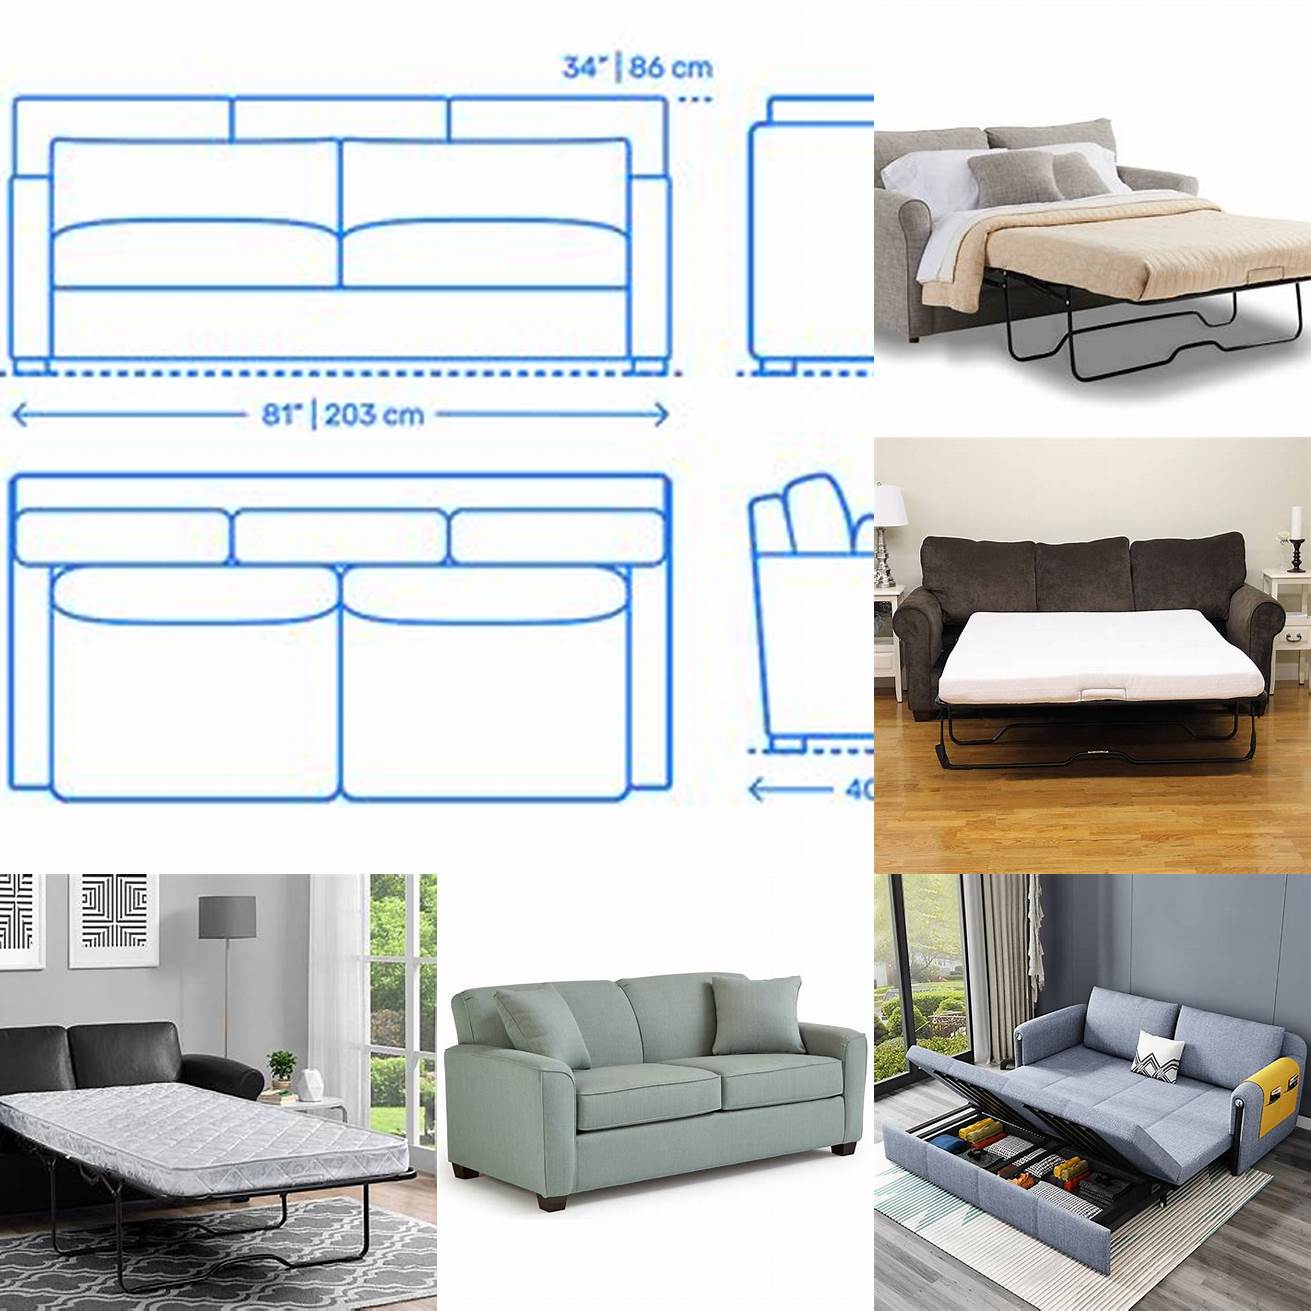 Size Full Sleeper Sofas come in different sizes so make sure you choose one that fits your space